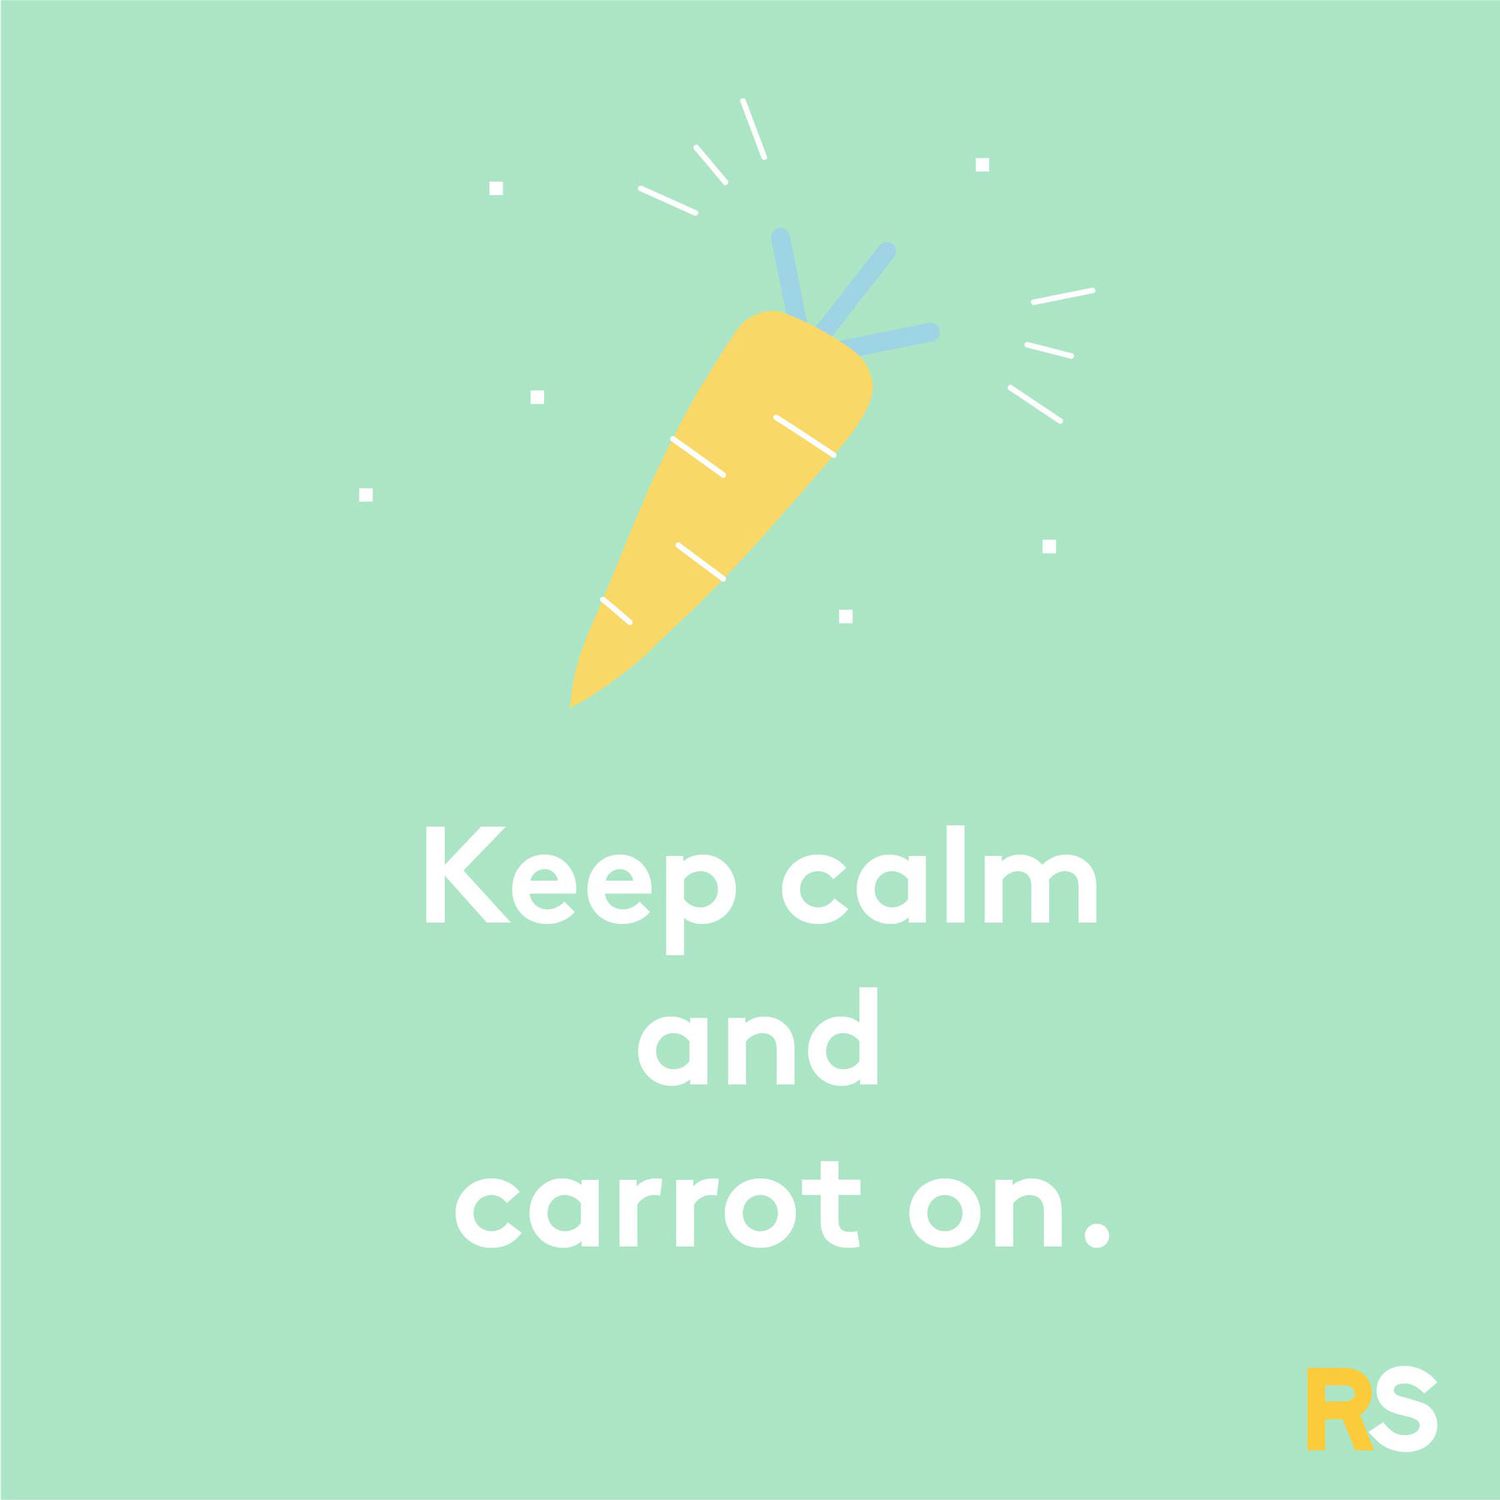 Easter quotes, captions, and messages - Keep calm and carrot on.